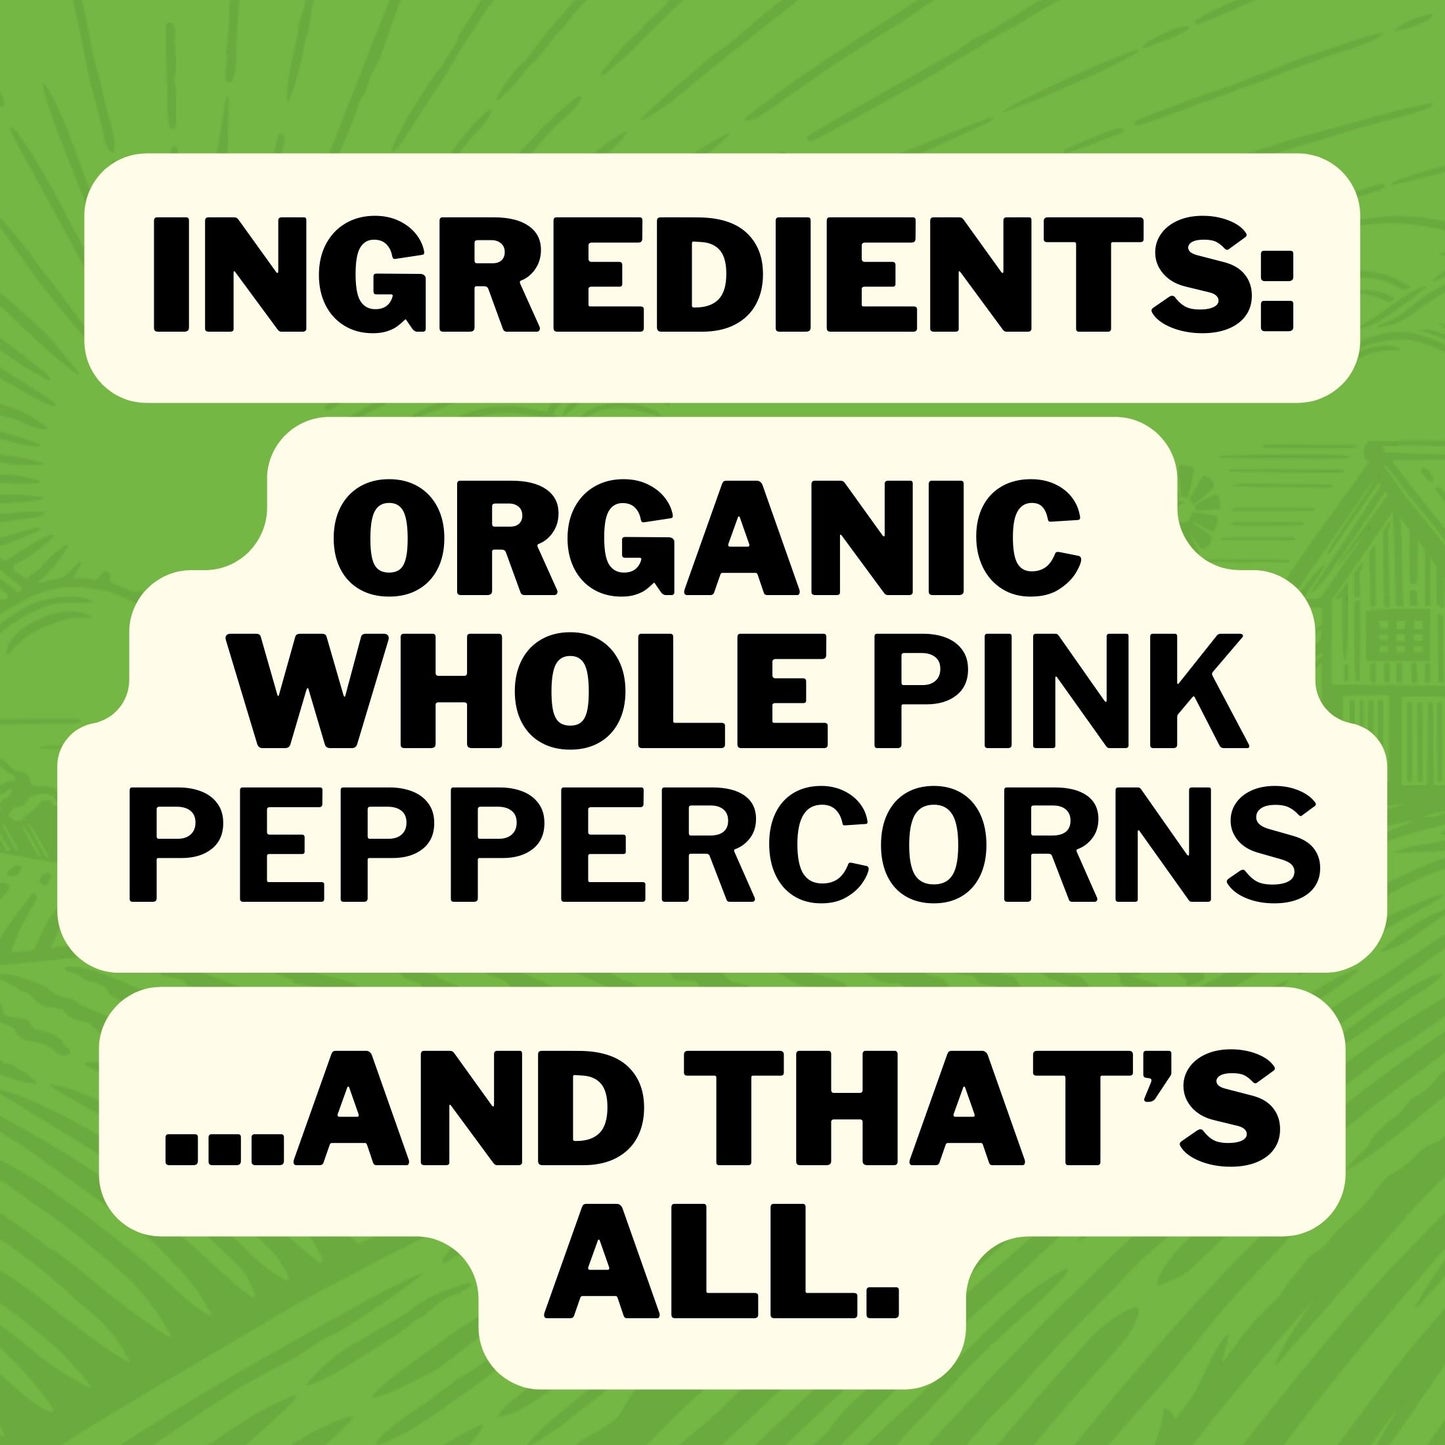 Ingredients : Whole Pink Peppercorns ... and that is all.